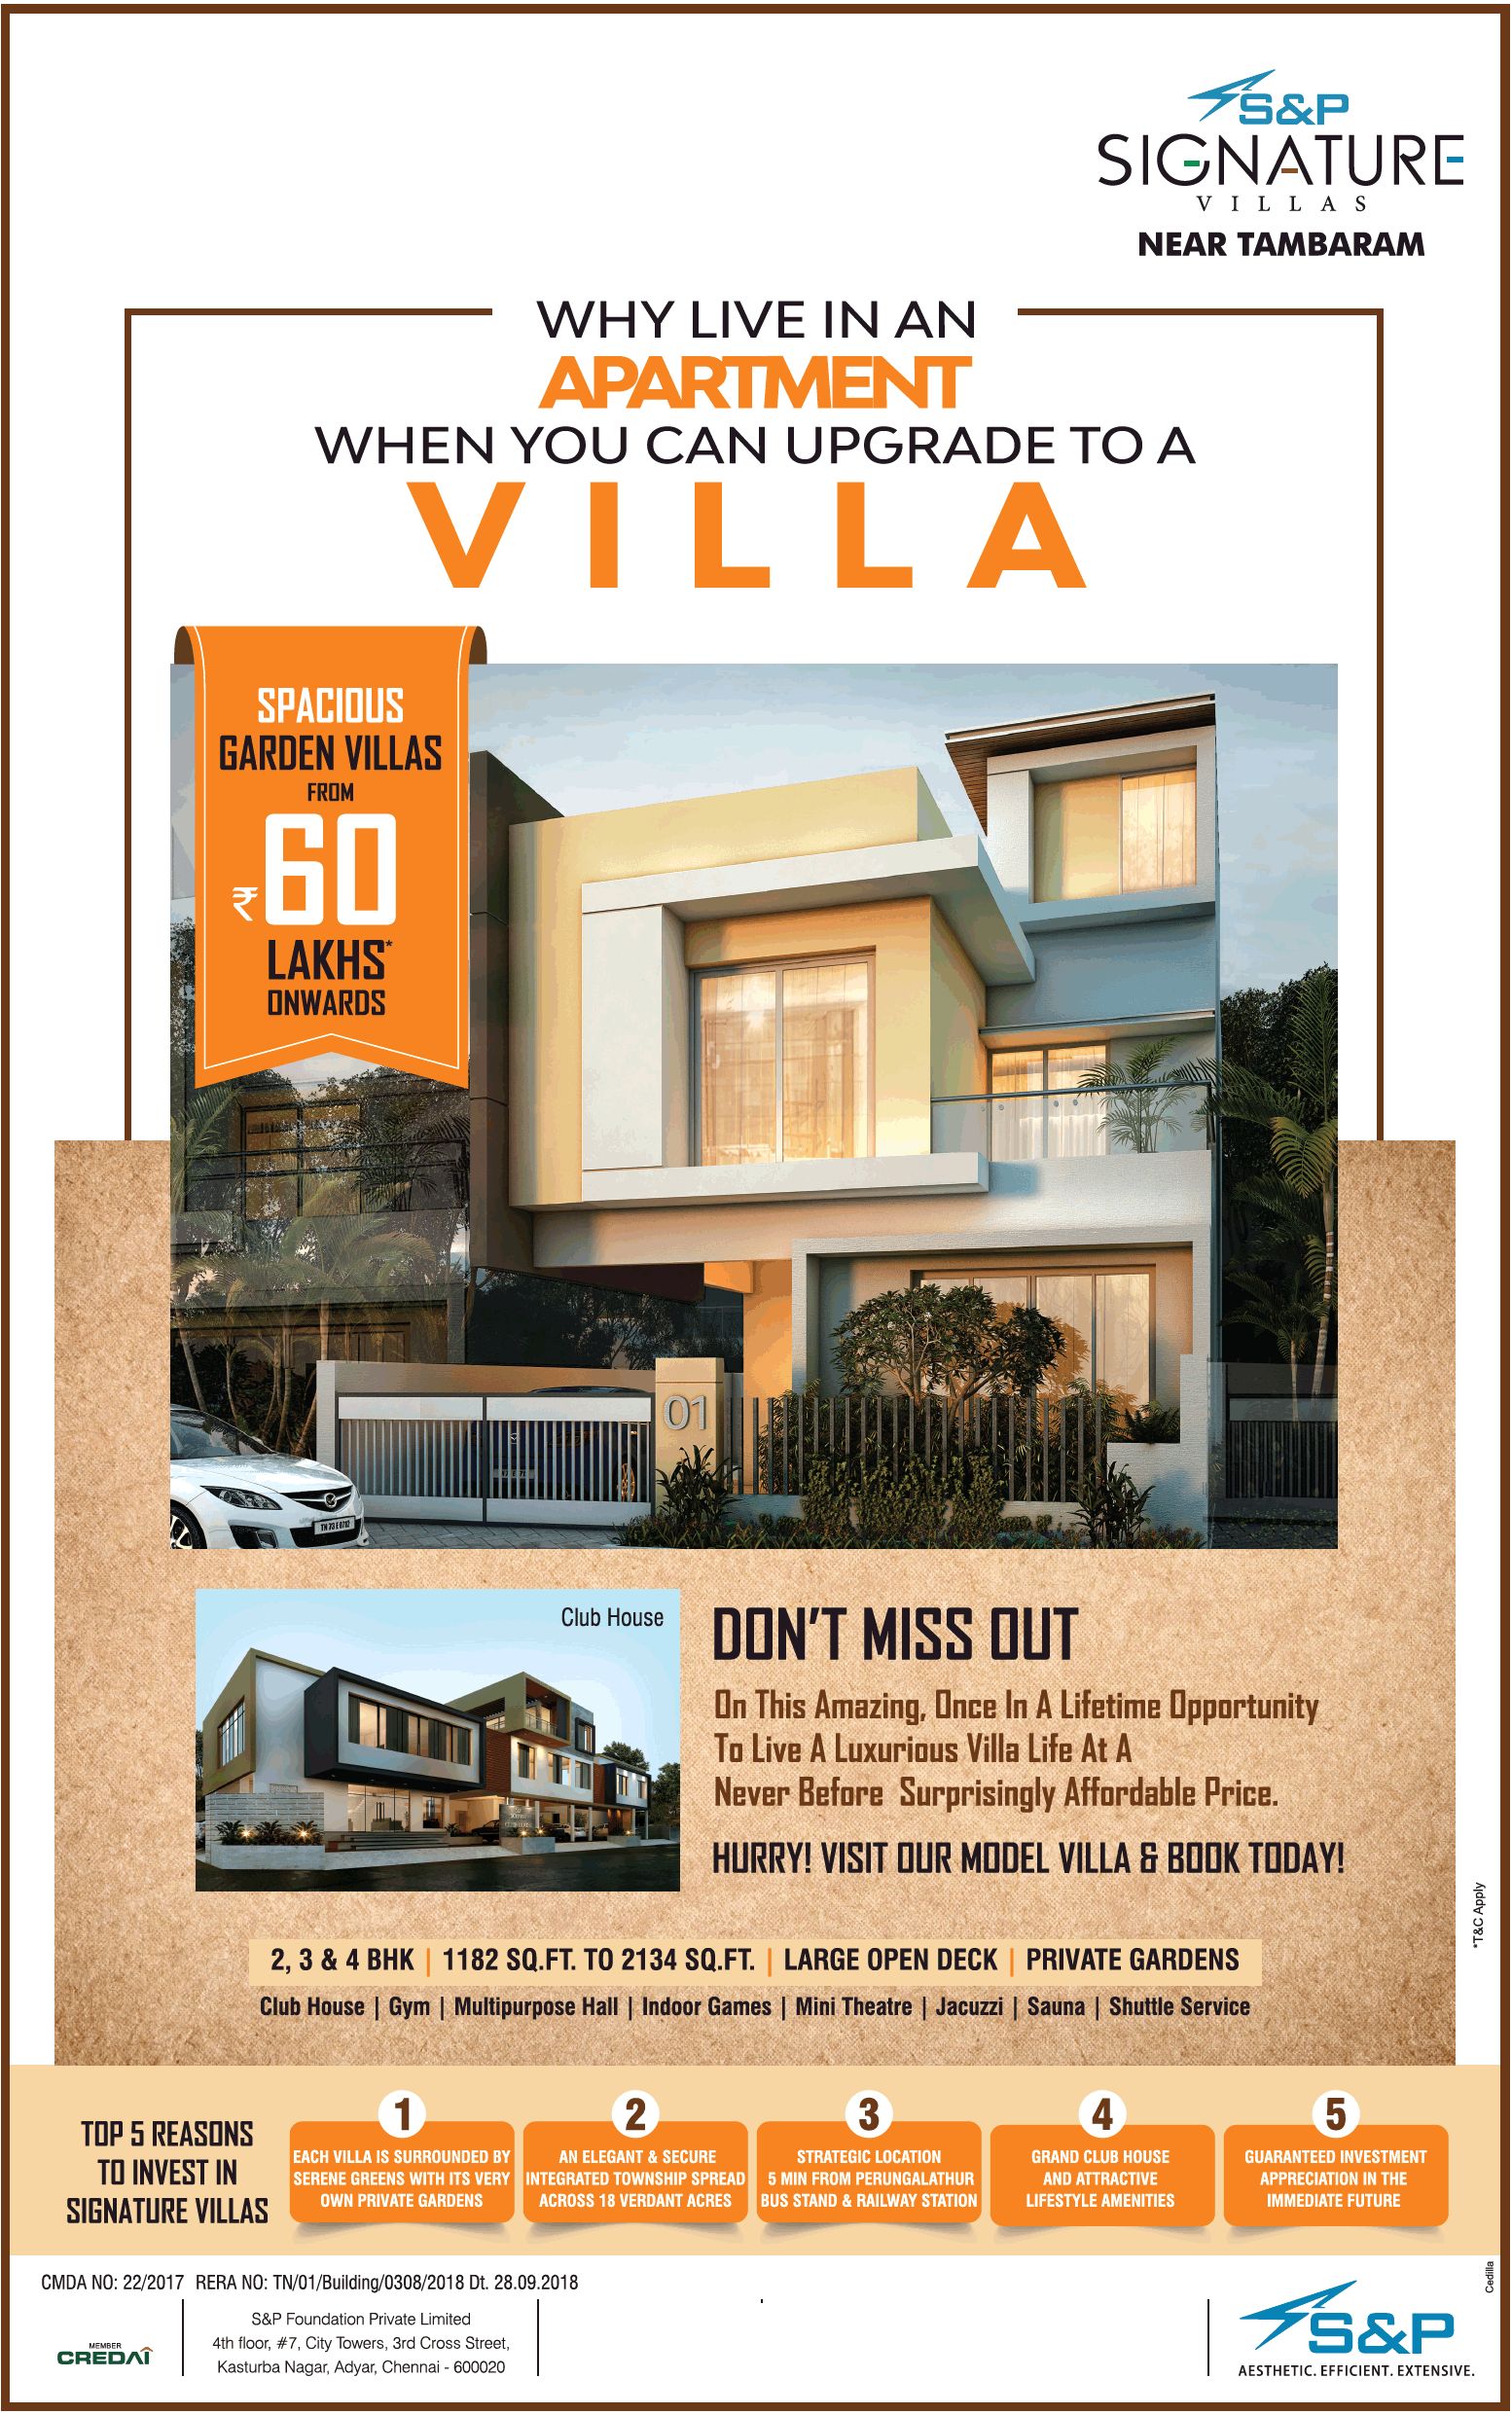 Book 2, 3 & 4 BHK Rs 60 Lac at S And P Signature Villas, Chennai Update